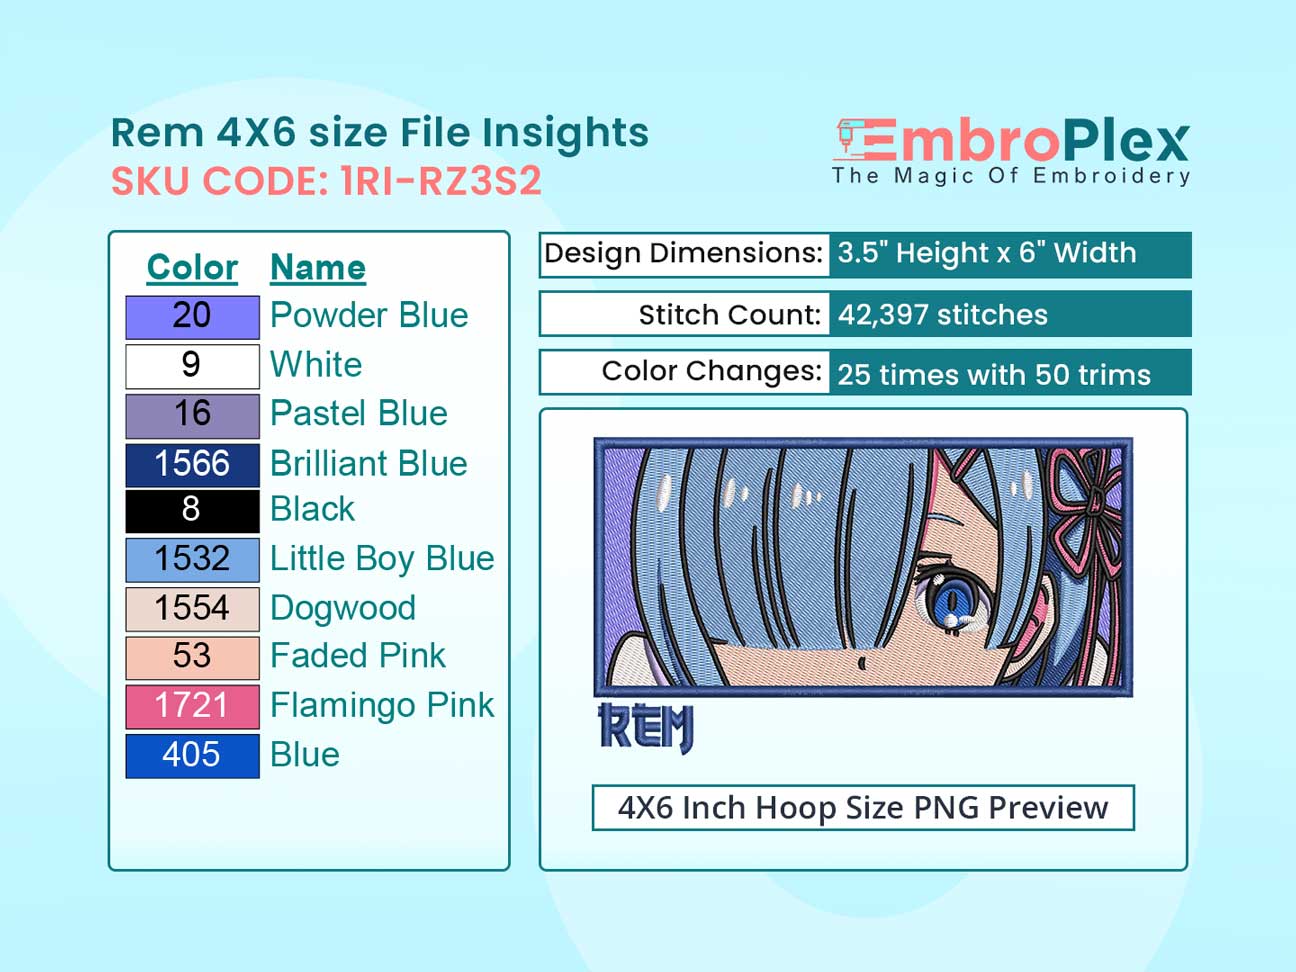 Anime-Inspired Rem Embroidery Design File - 4x6 Inch hoop Size Variation overview image